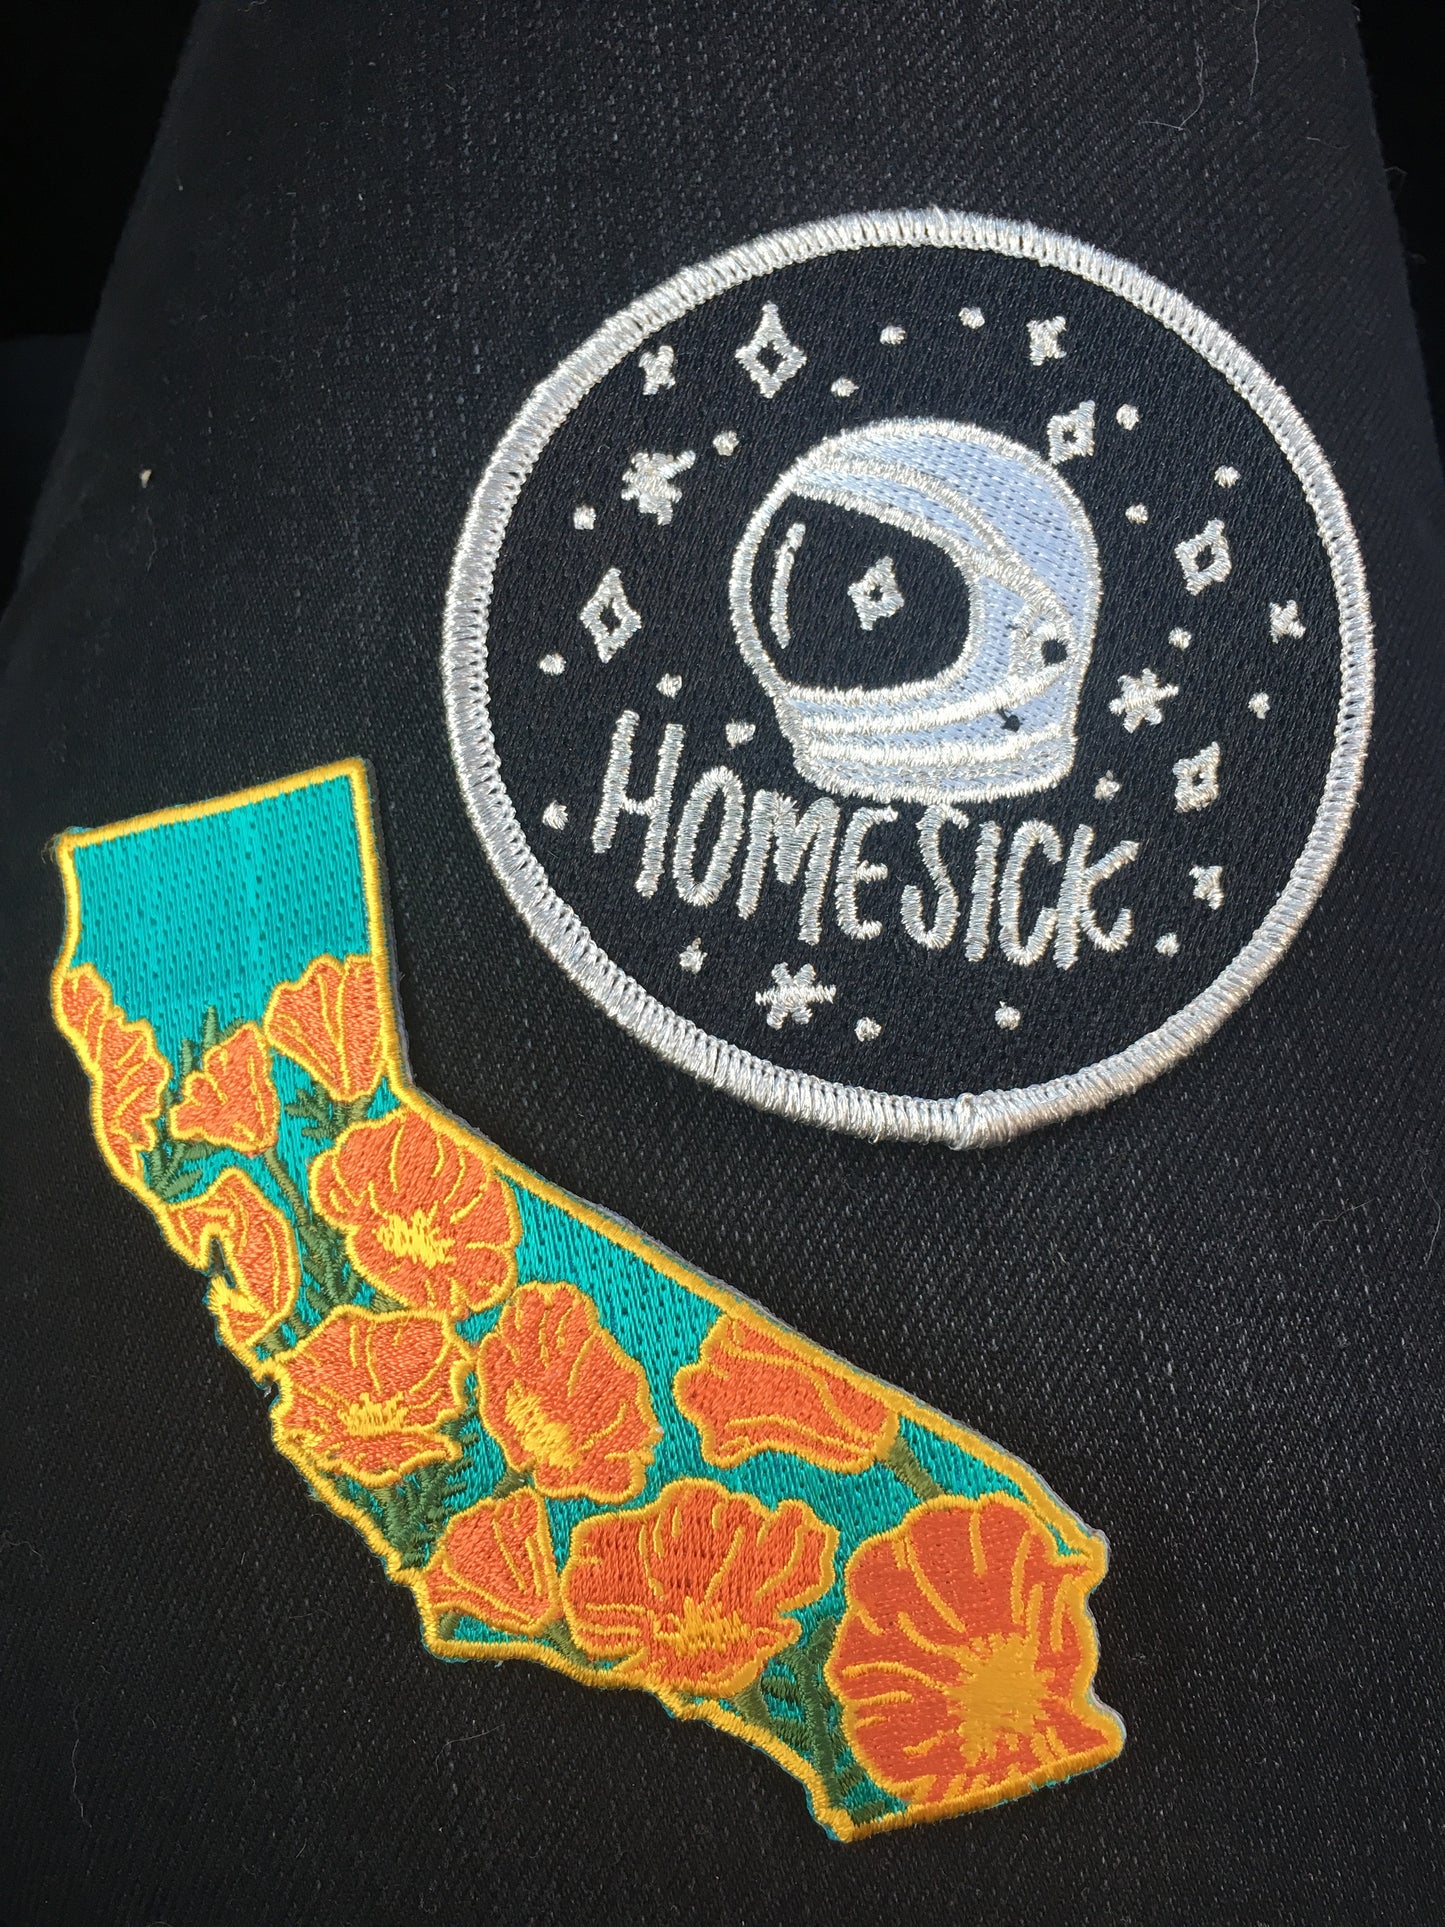 Homesick Embroidered Patch 3.5"